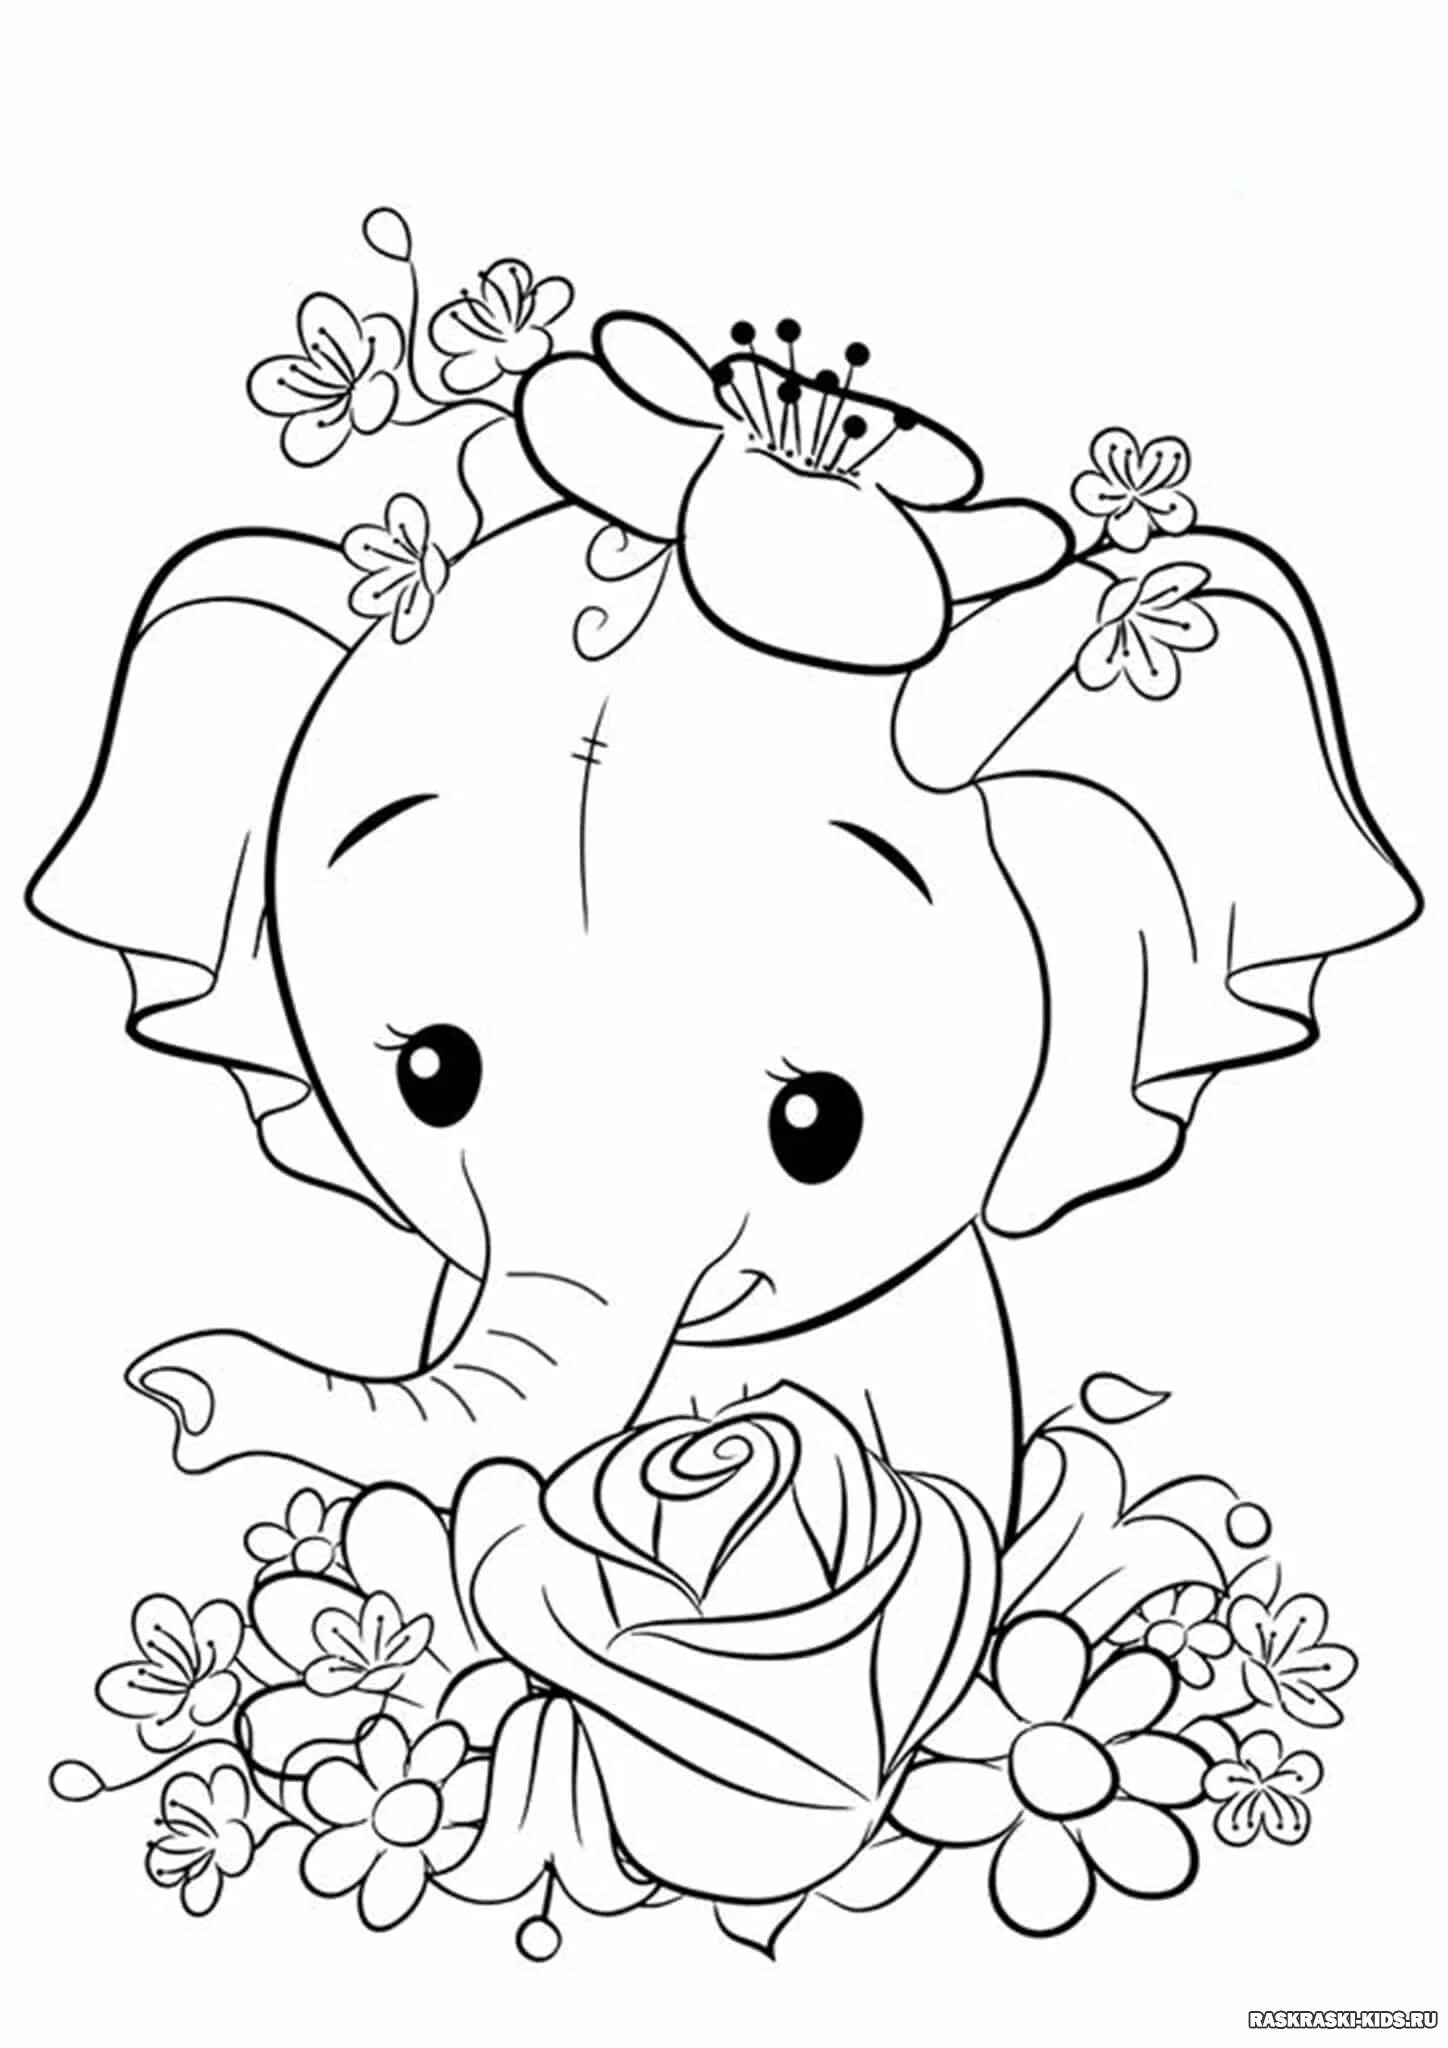 Fat animal coloring pages for girls